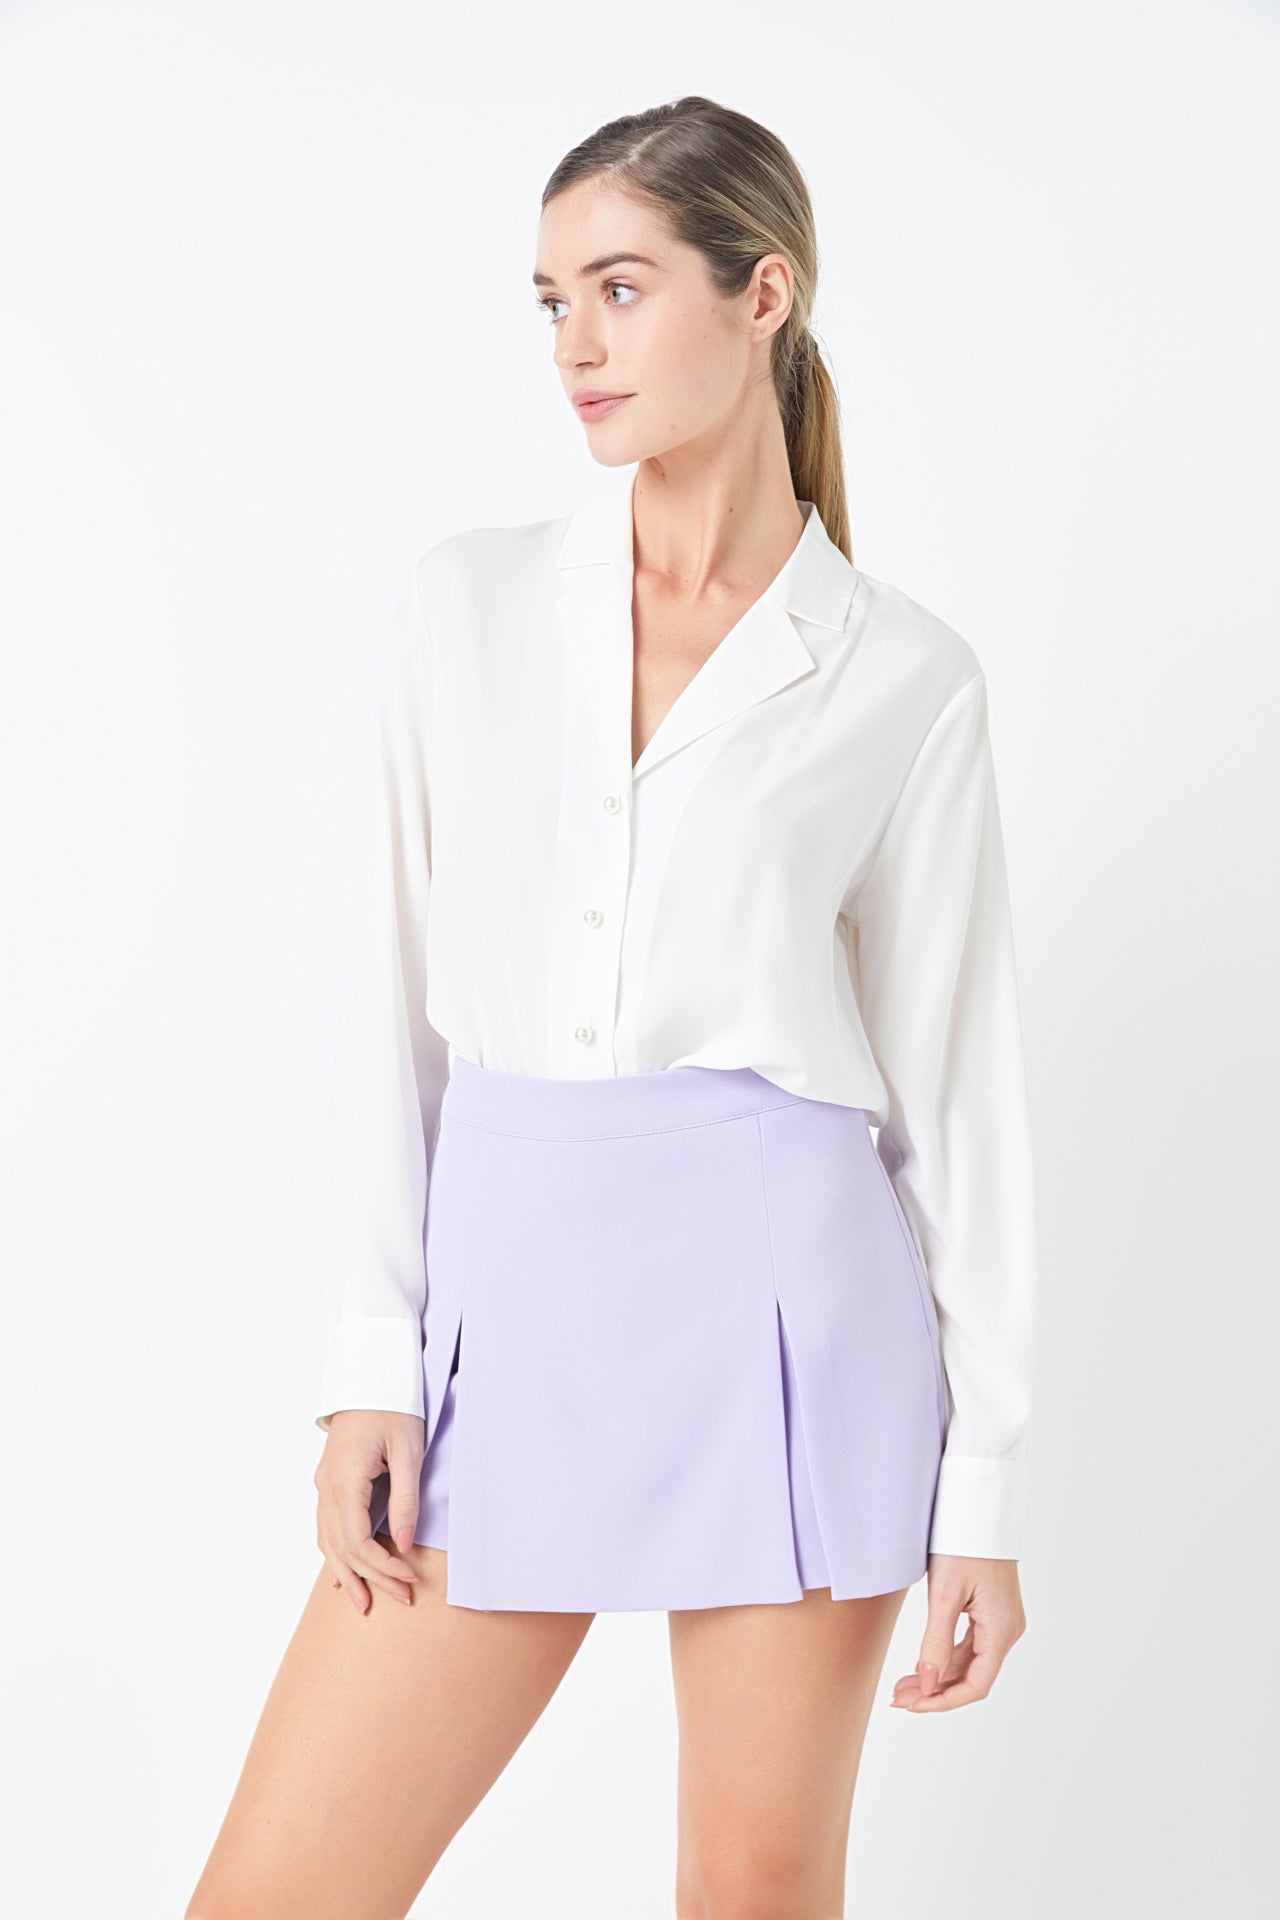 ENDLESS ROSE - Pearl Button Collared Shirt - SHIRTS & BLOUSES available at Objectrare